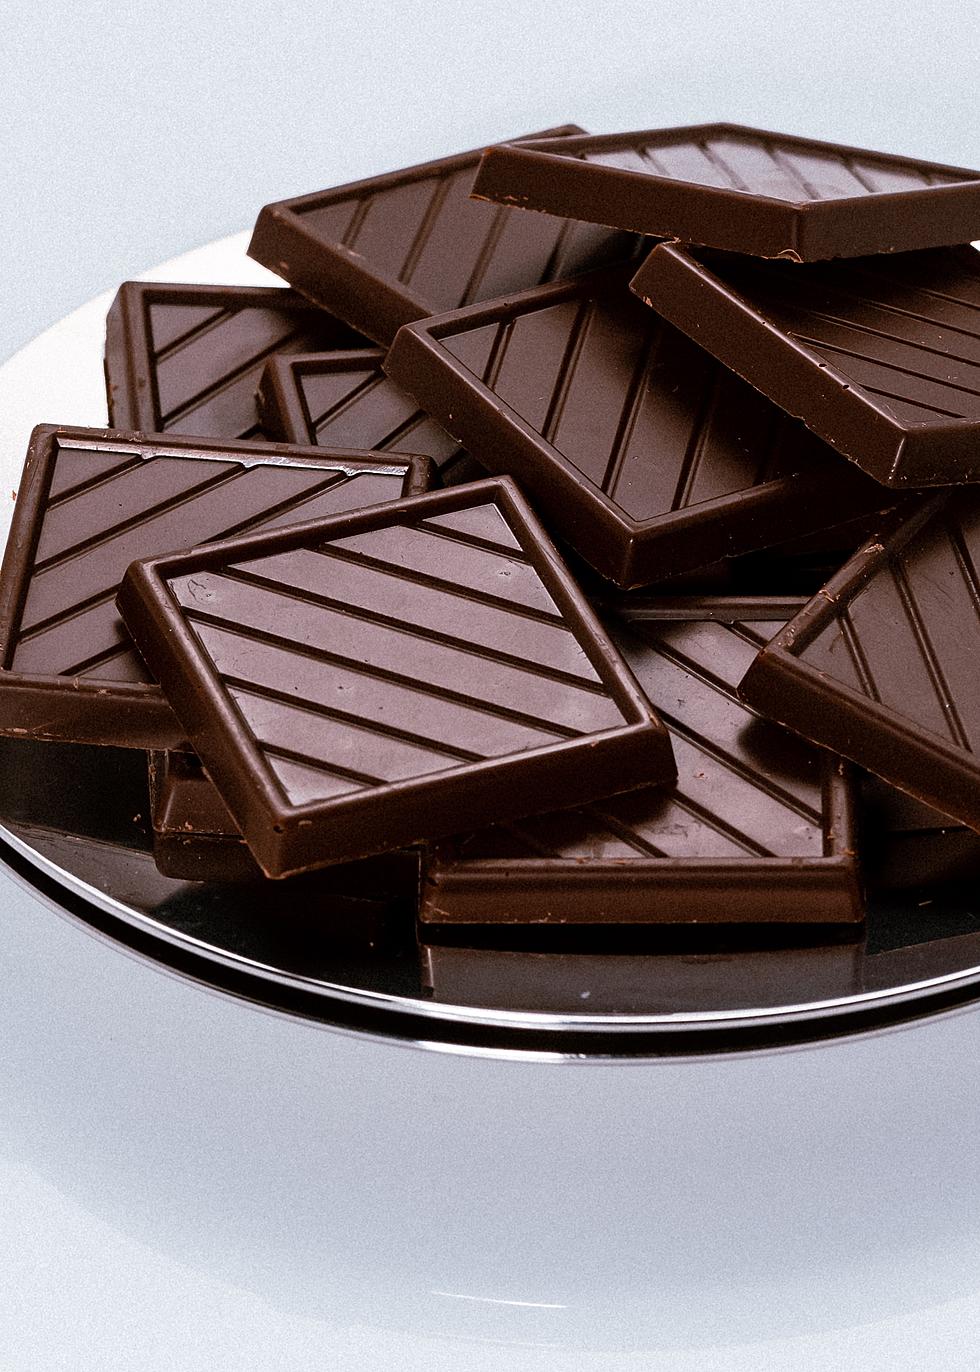 Just In: Scientists Say Eating Chocolate For Breakfast Is Good For You (Insert Happy Dance)